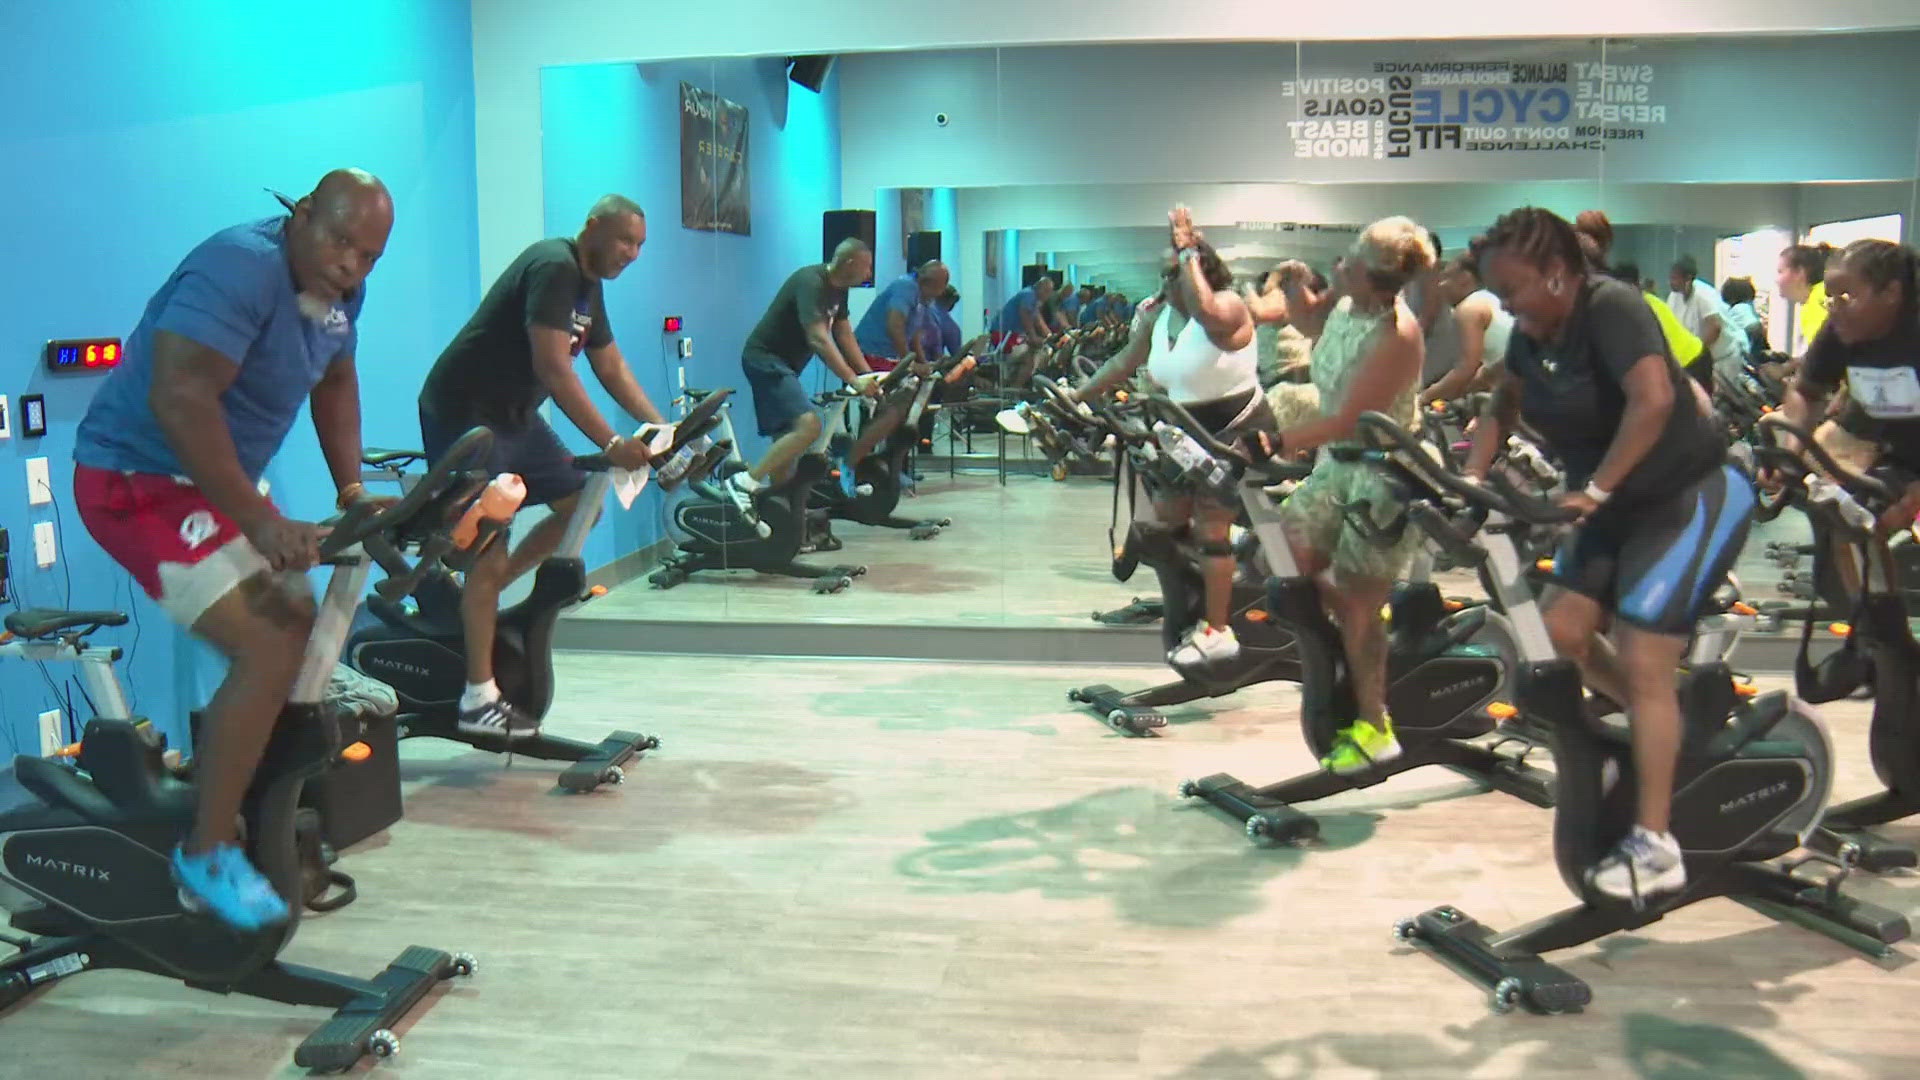 The Forsyth County sheriff leads spin classes several times a week.